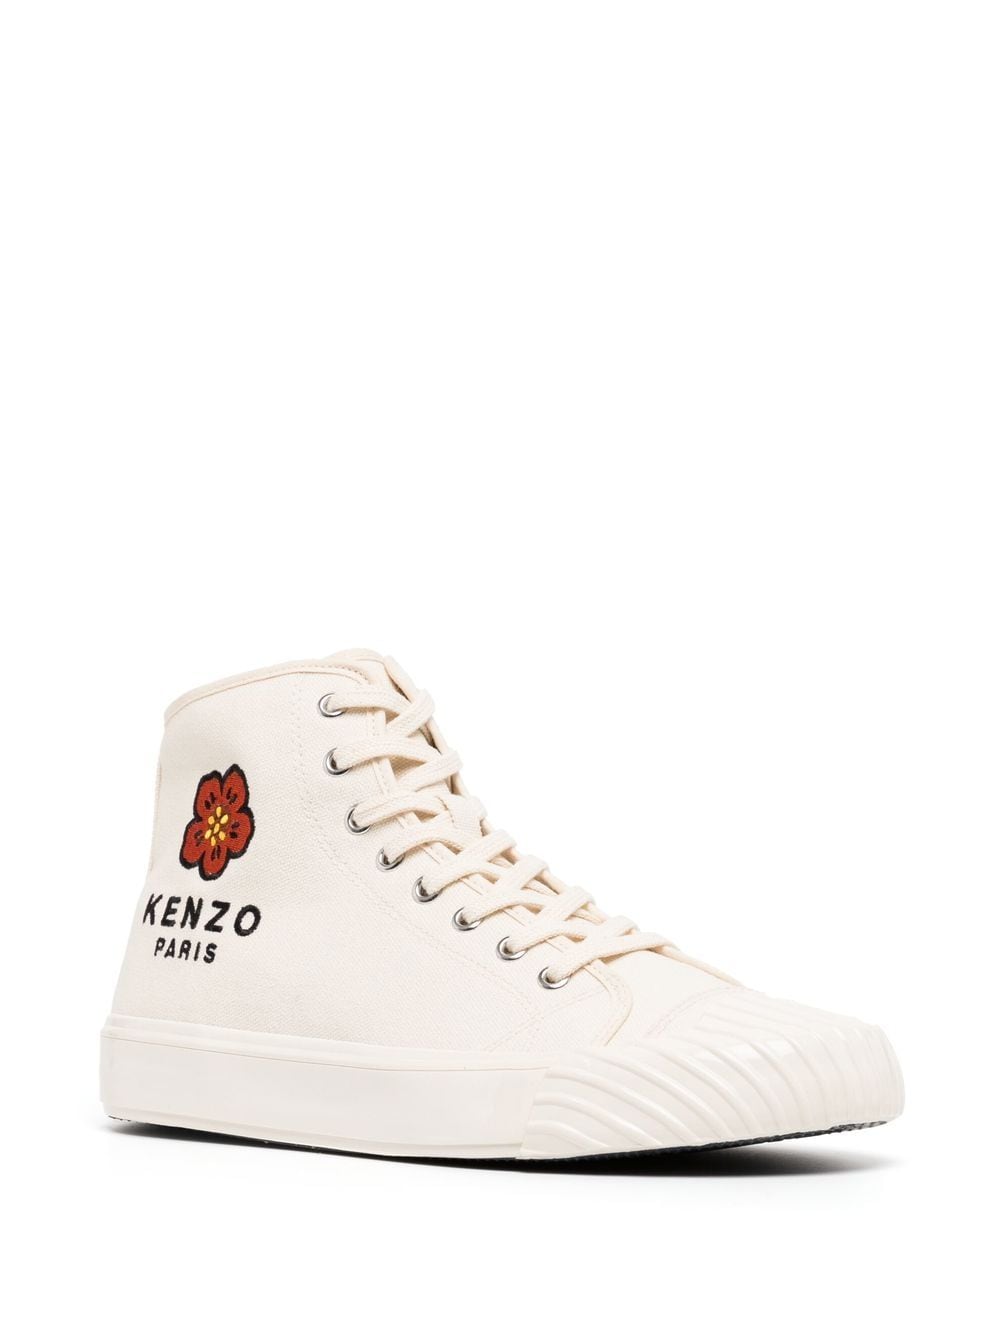 Image 2 of Kenzo logo-embroidered high-top sneakers